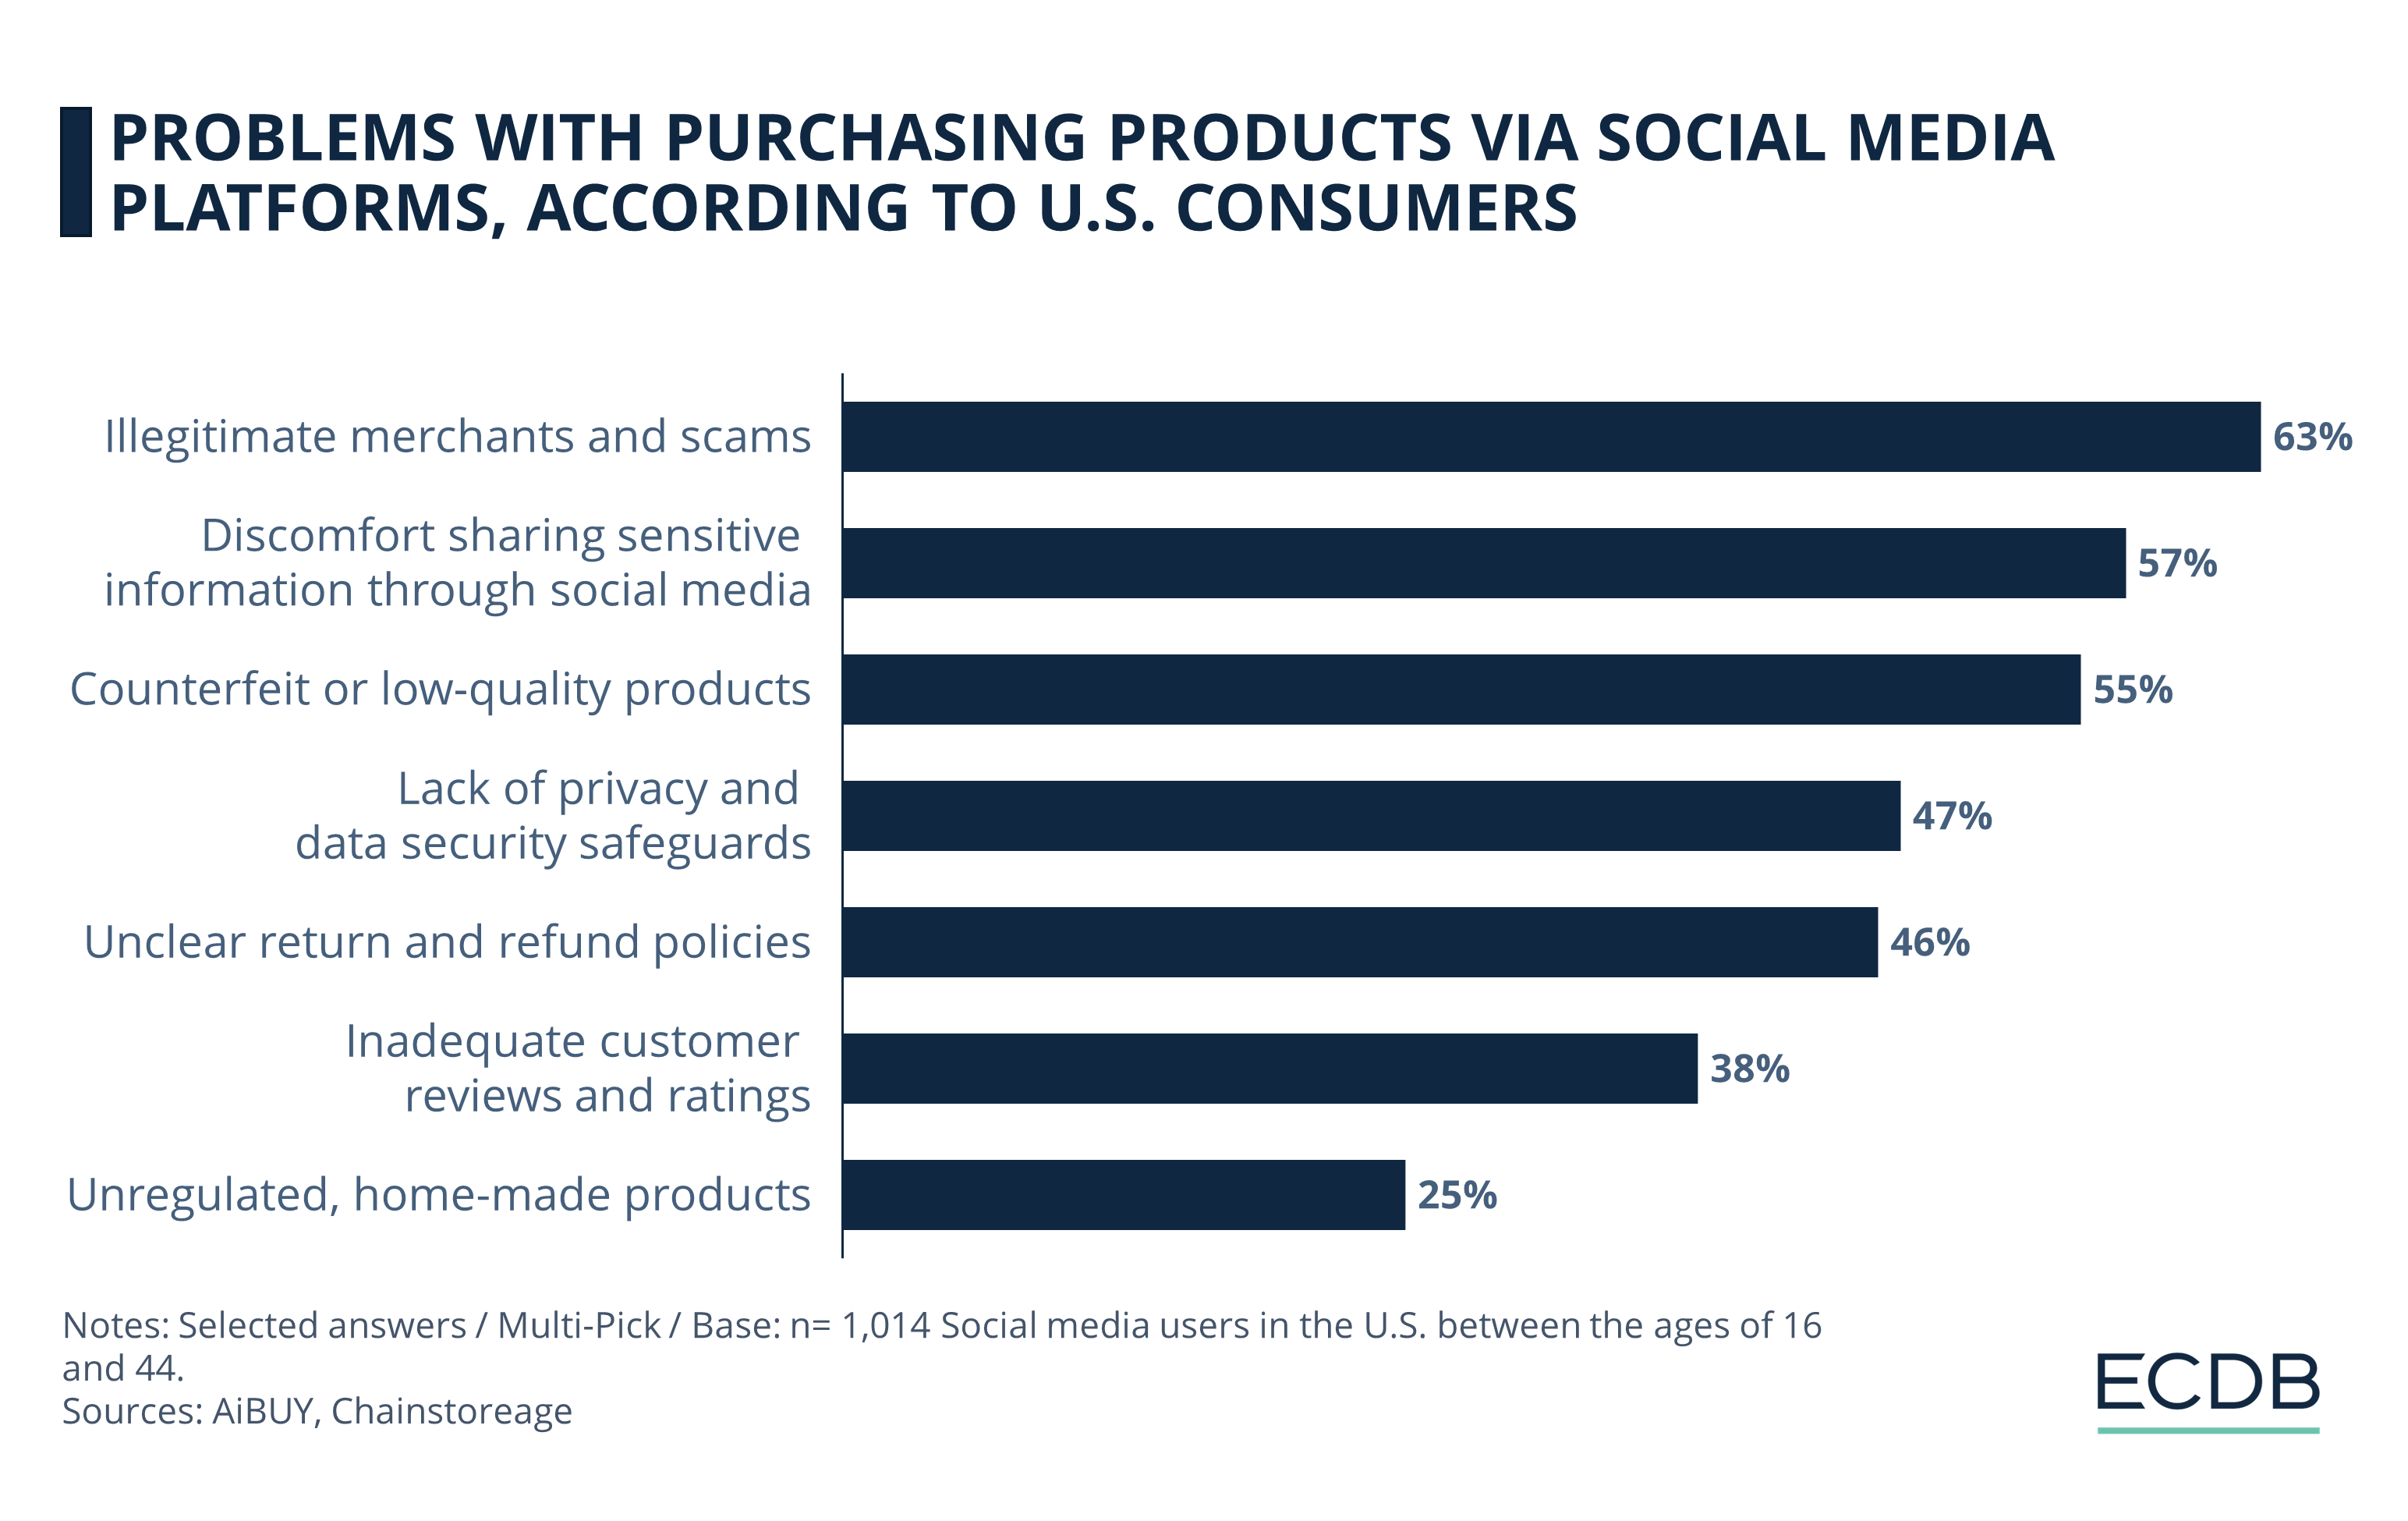 Problems With Purchasing Products via Social Media Platforms, According to U.S. Users